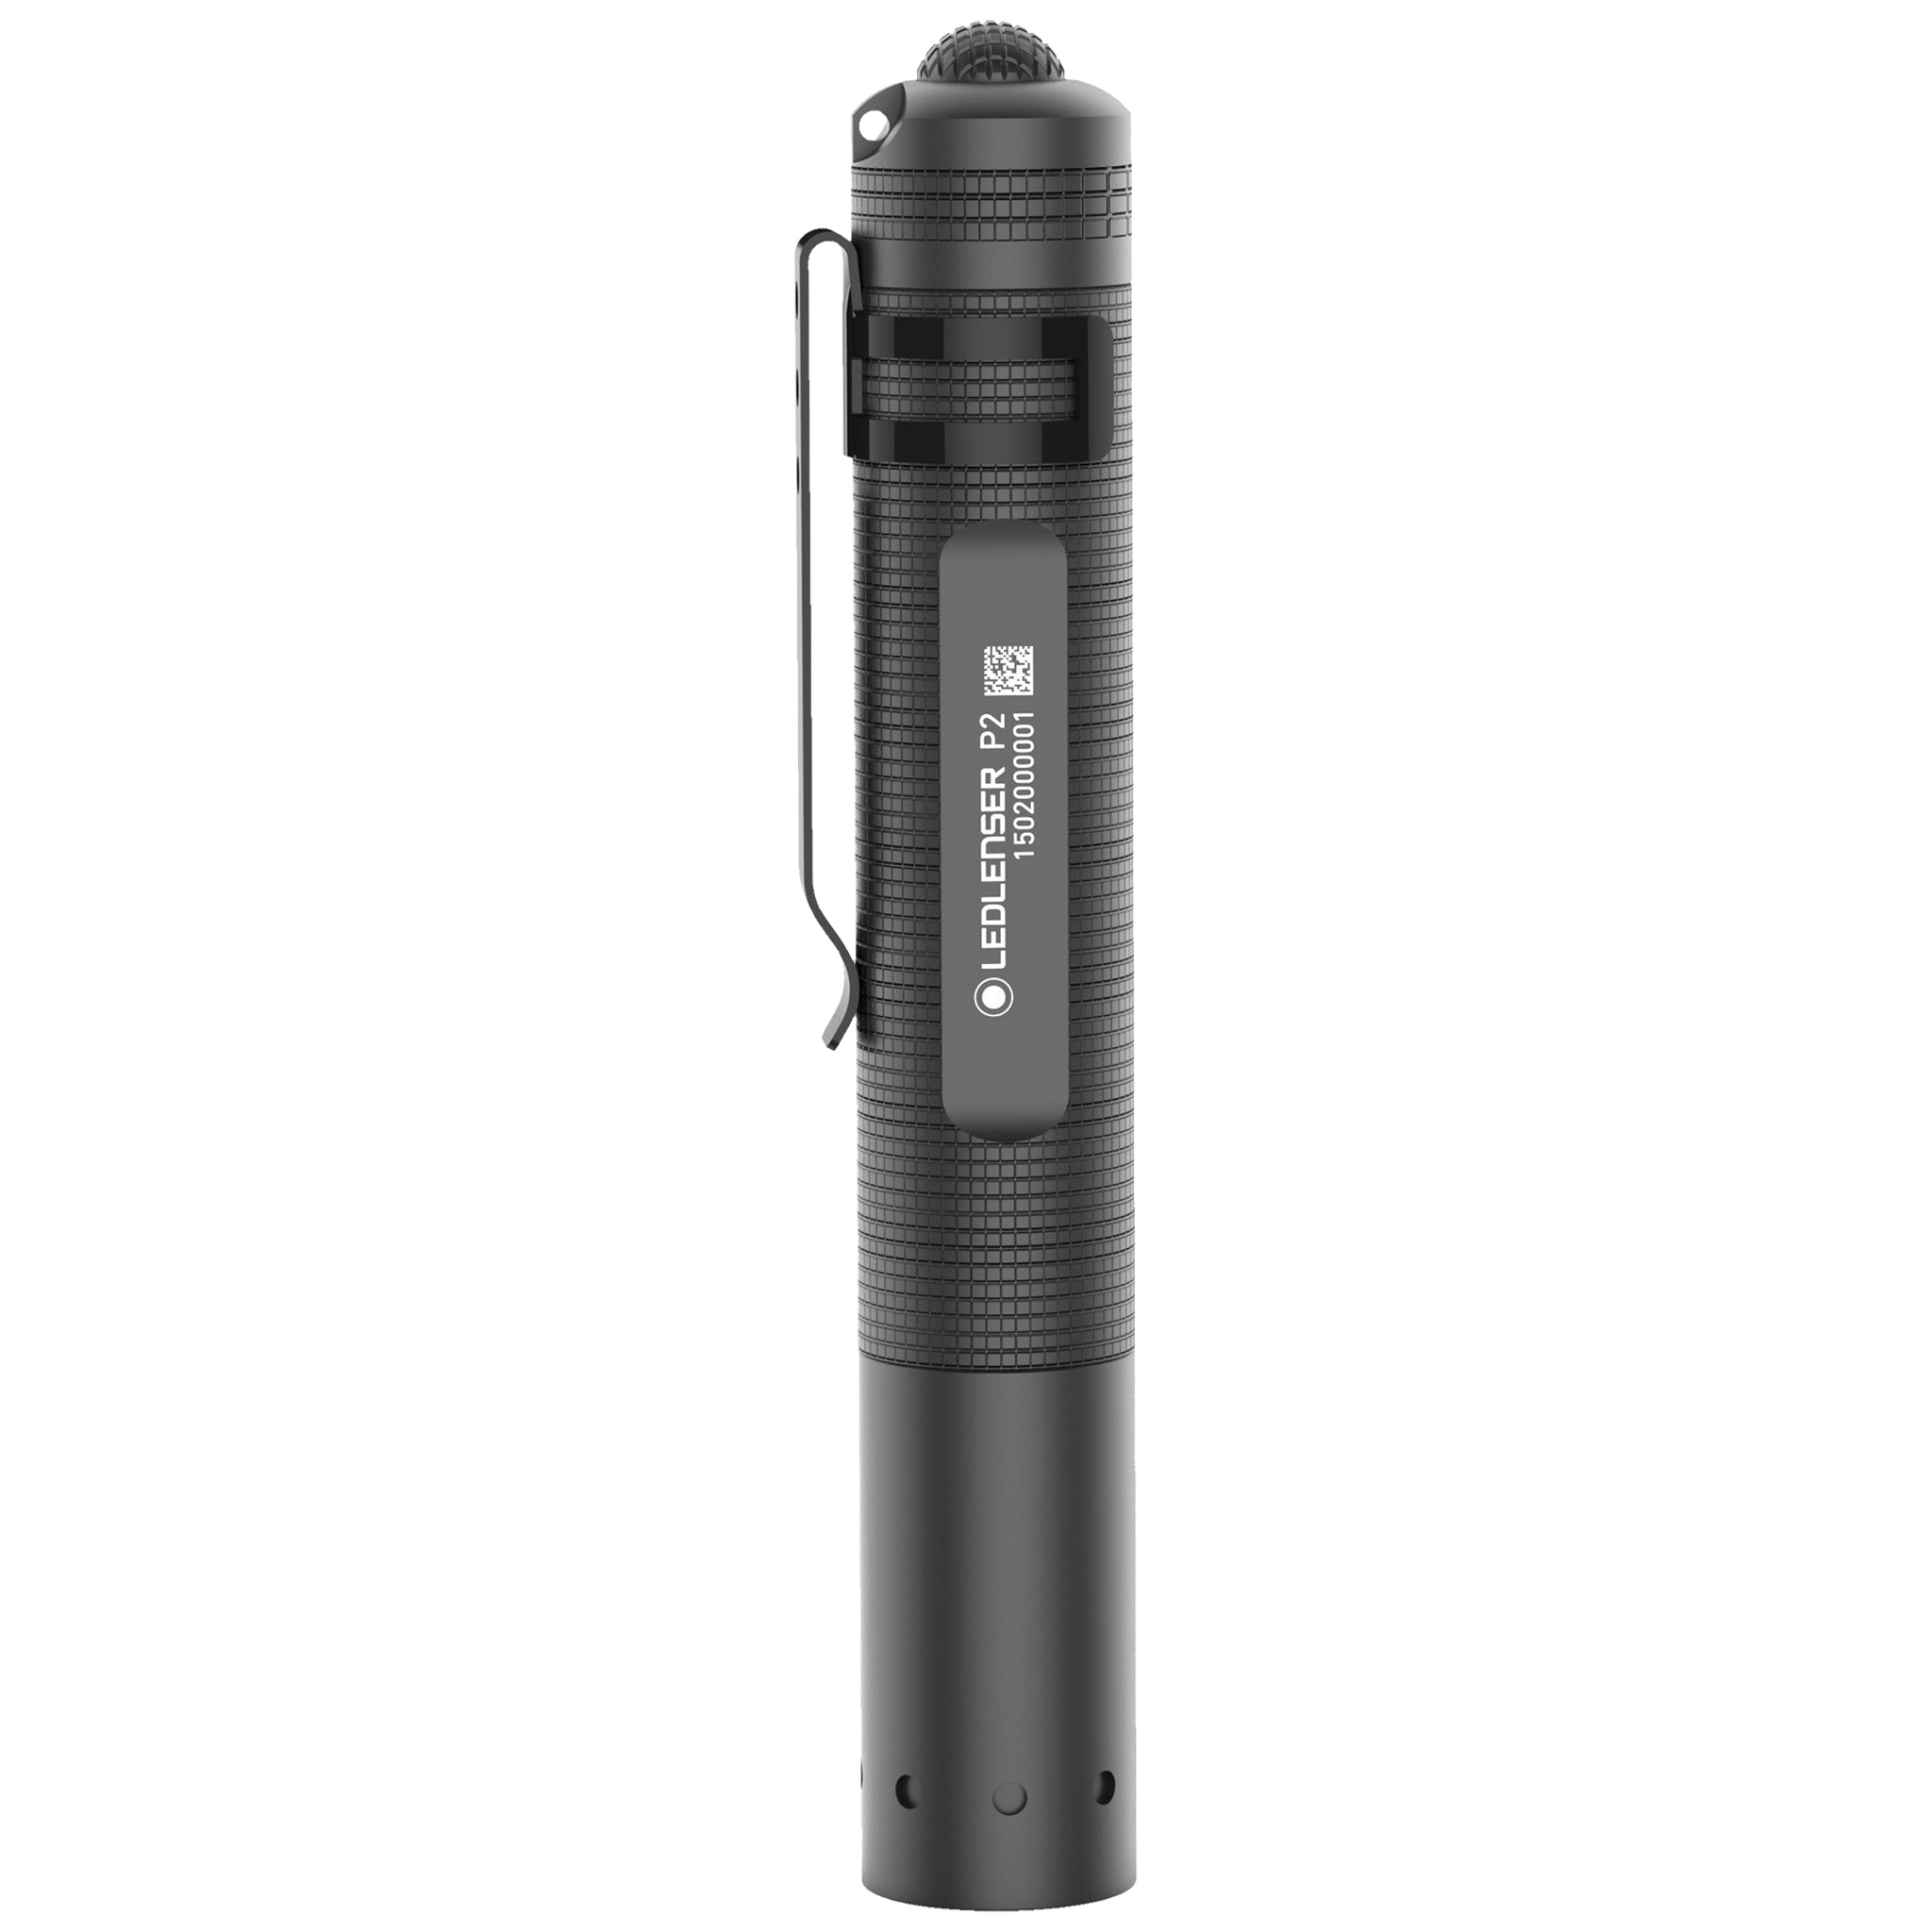 P2 Battery Operated Torch